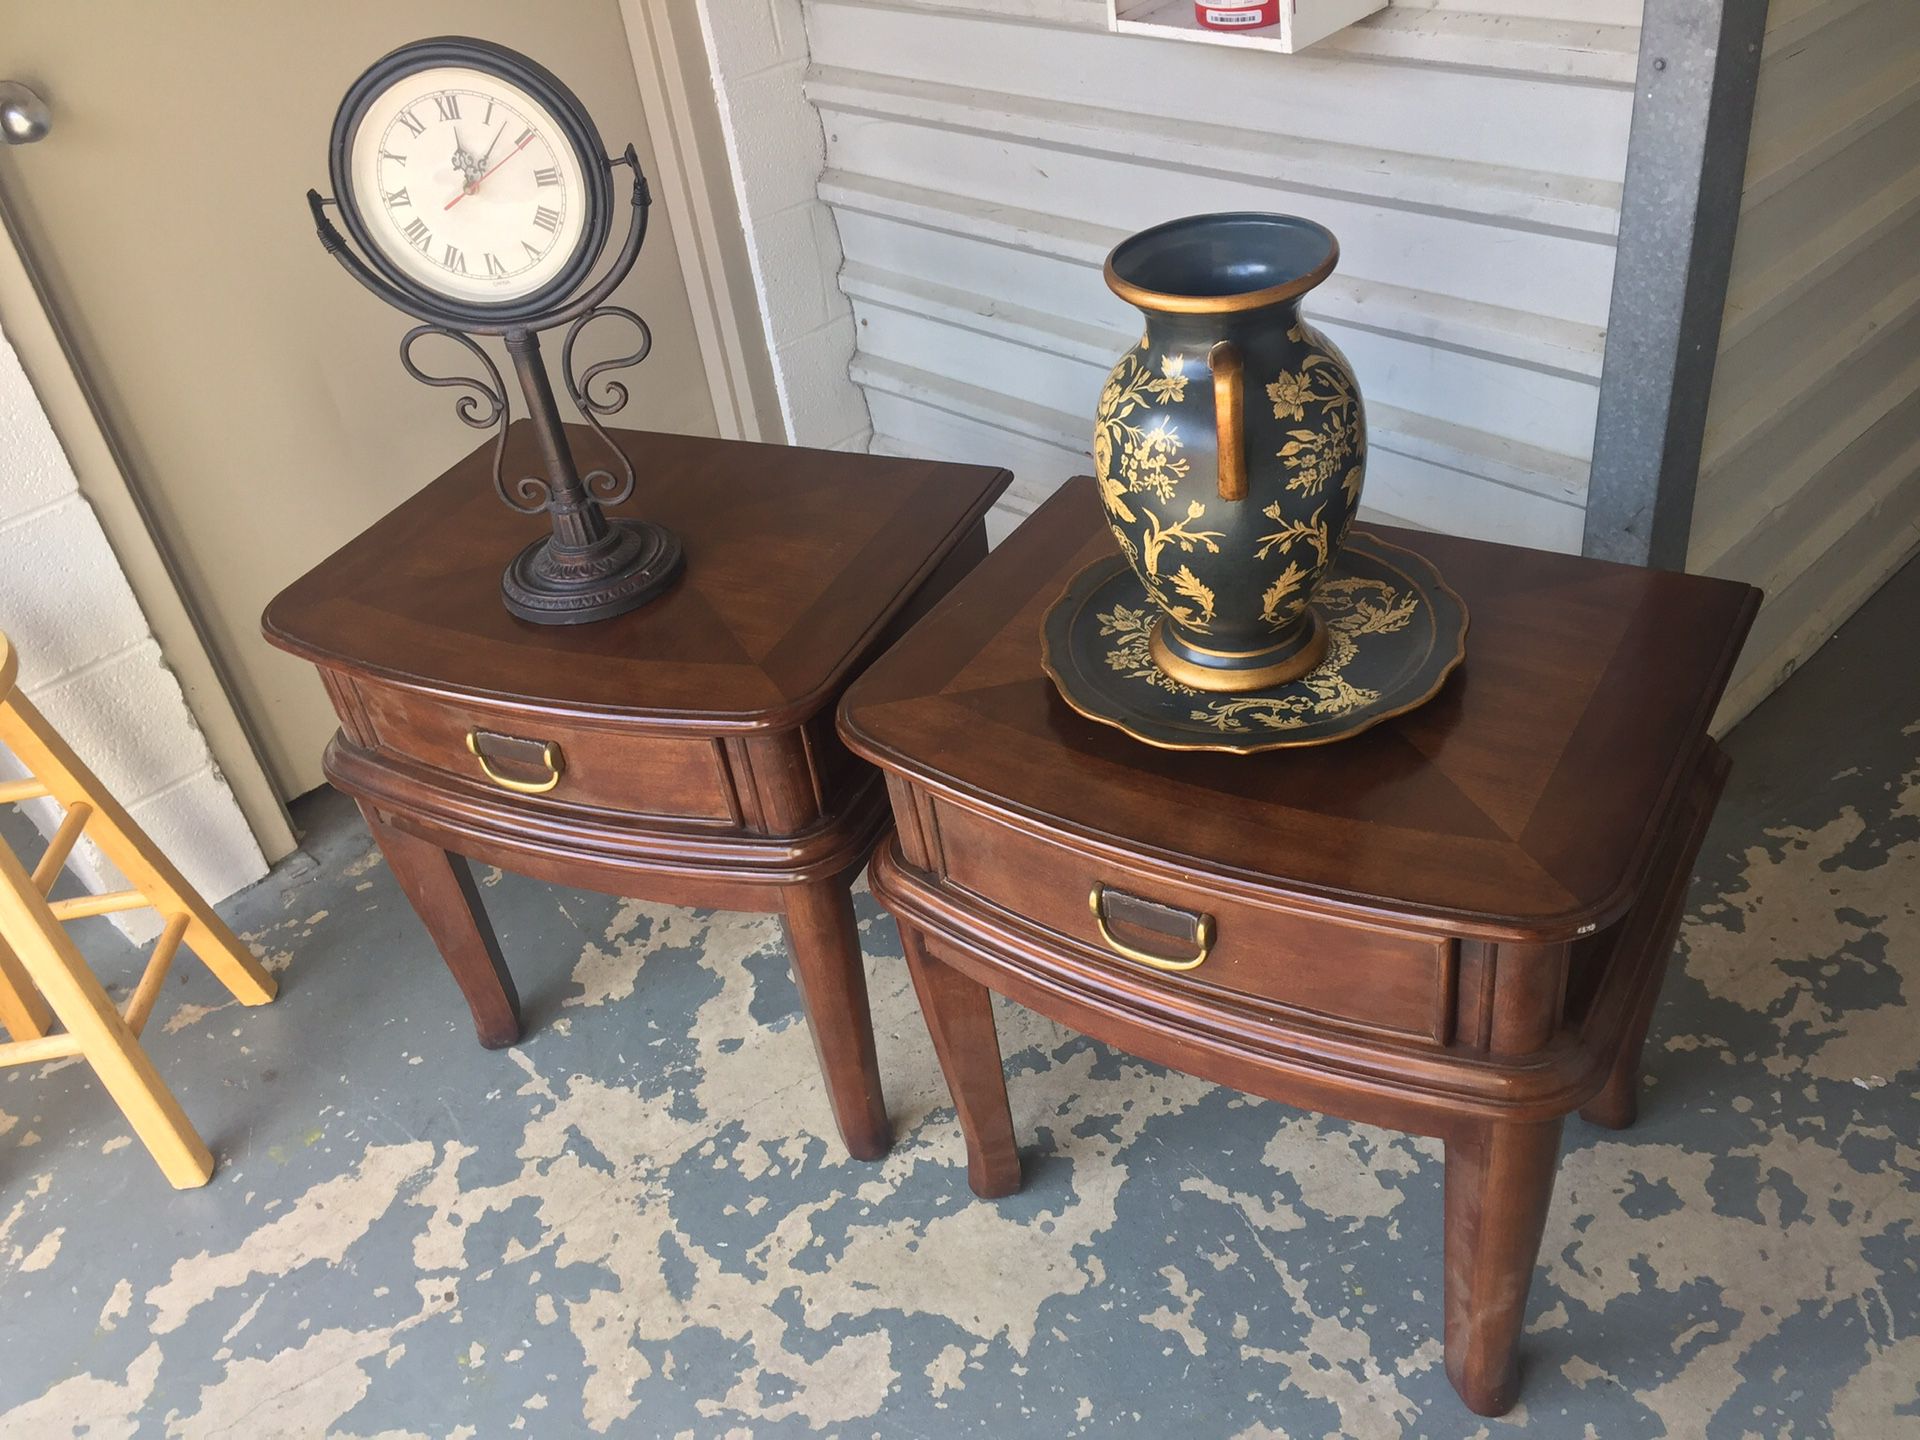 Beautiful side table set in excellent condition